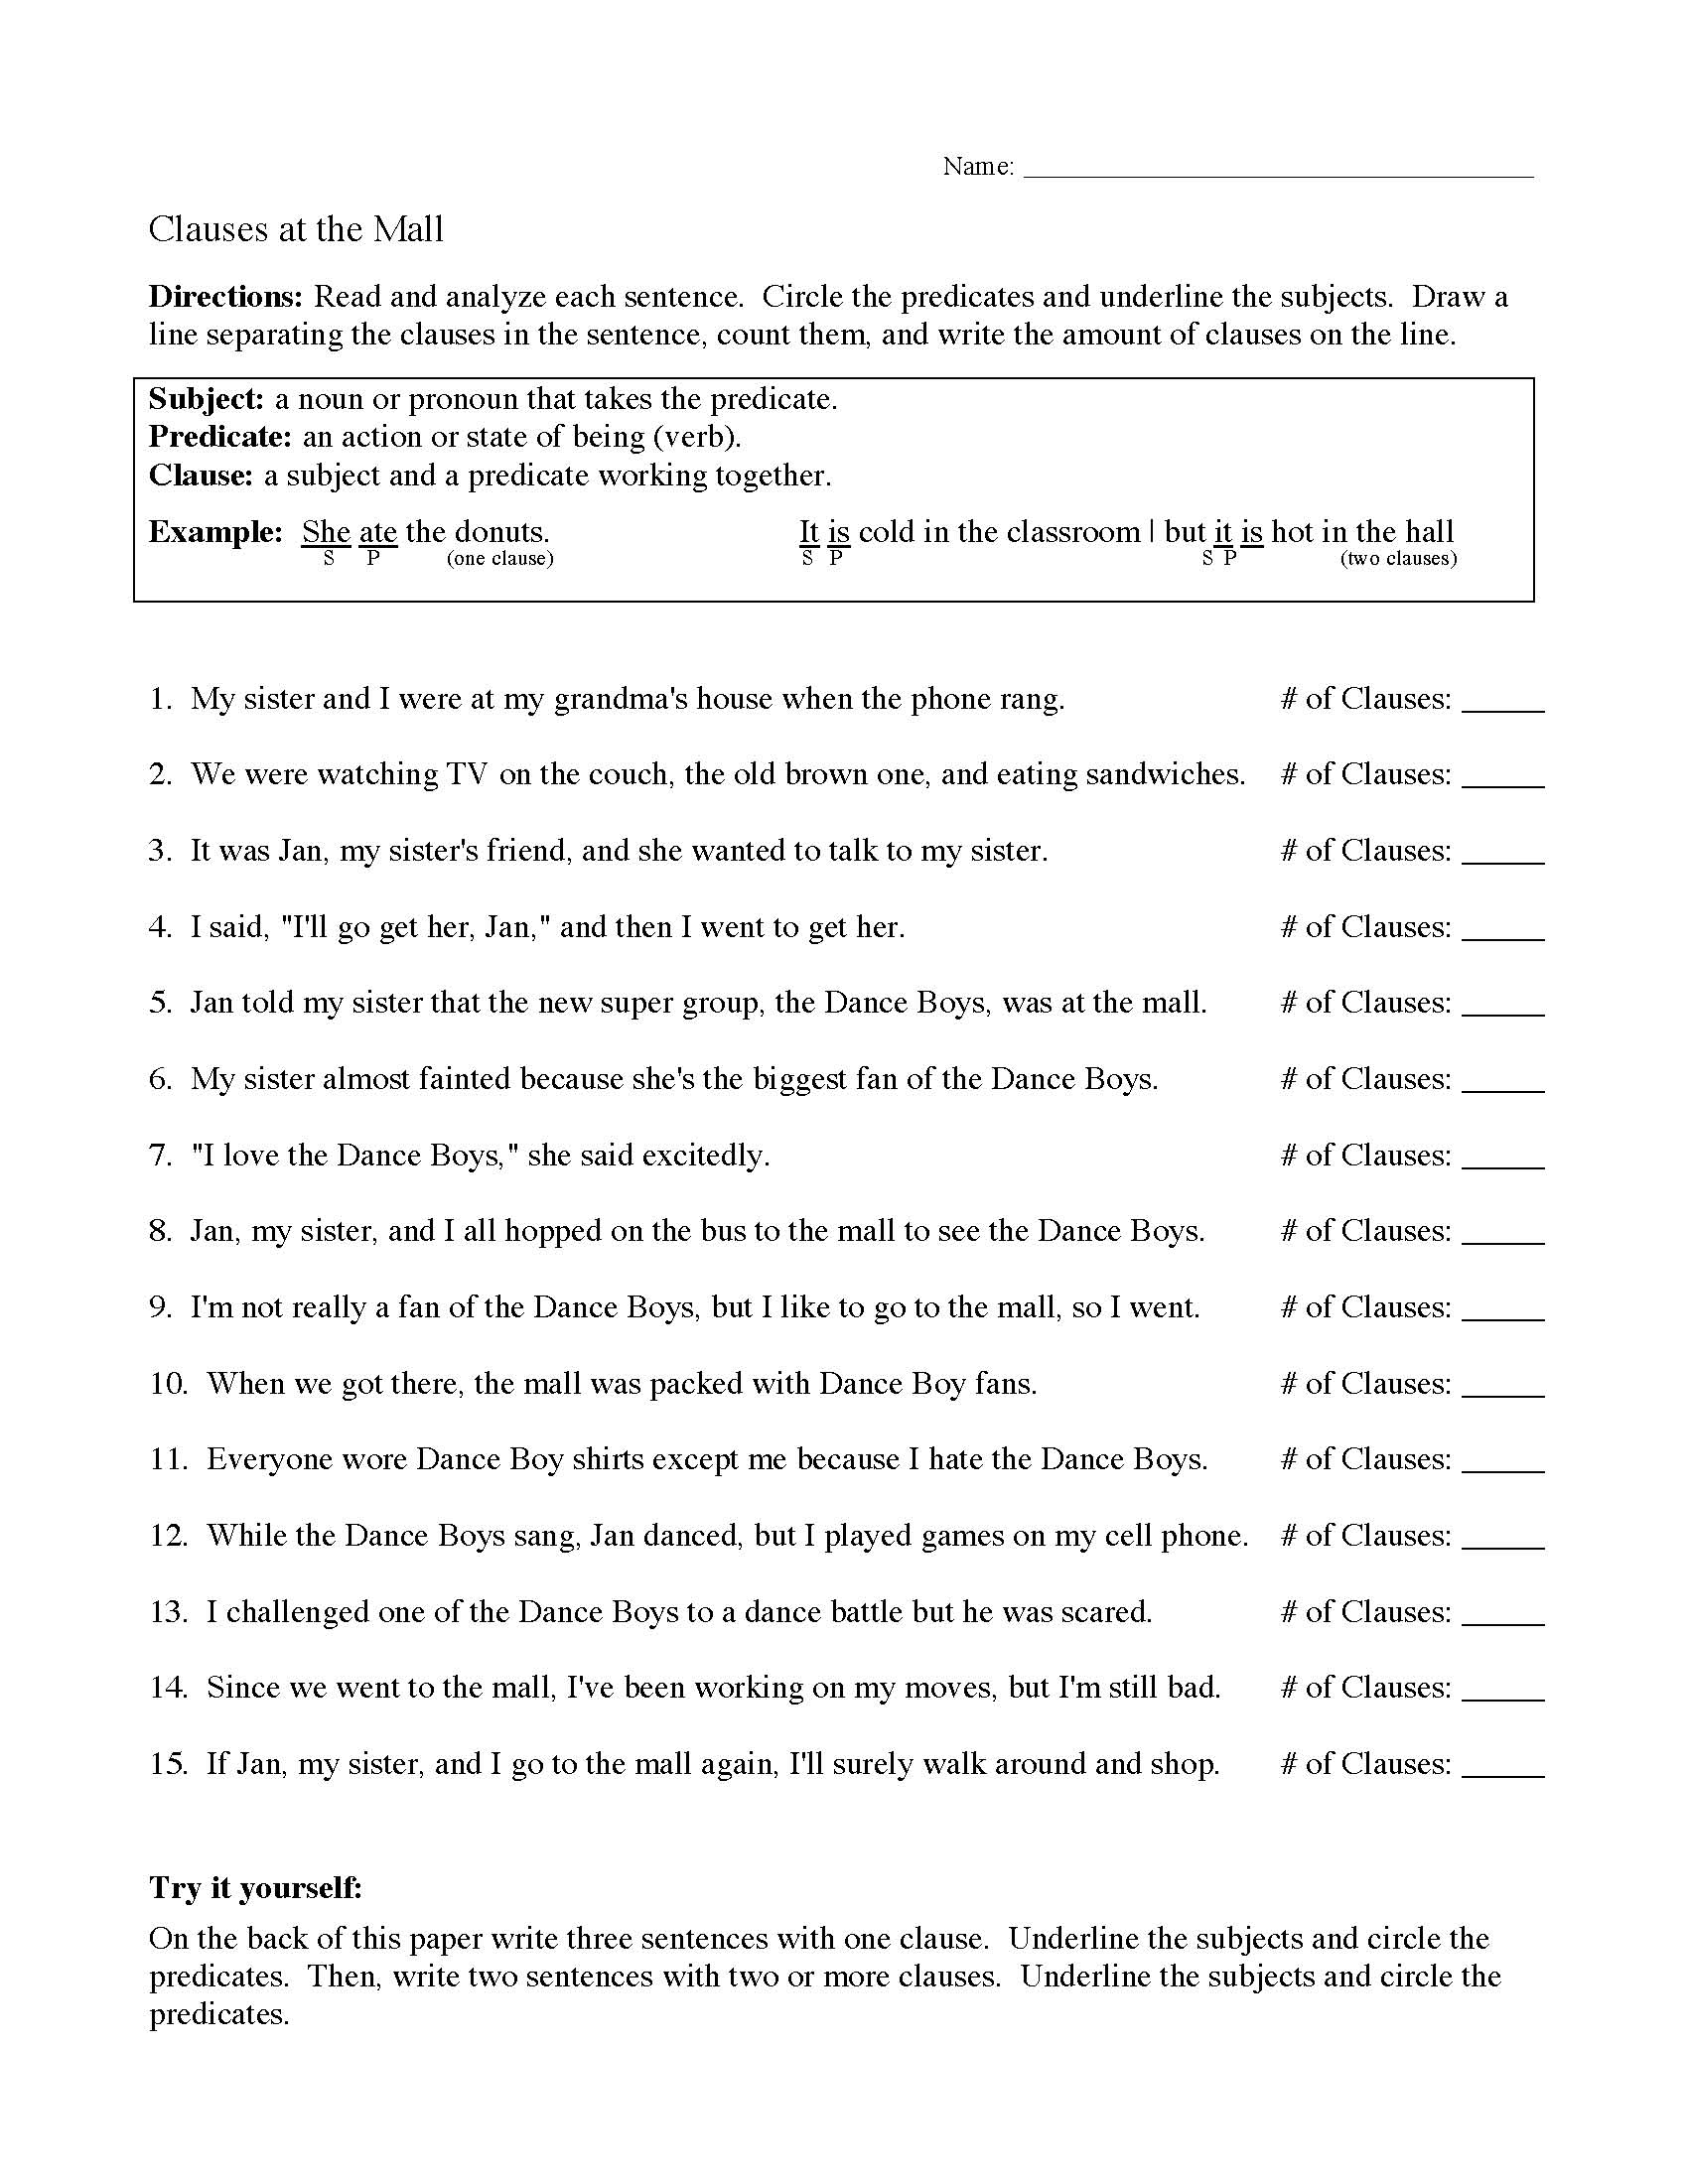 This is a preview image of Clauses at the Mall Worksheet. Click on it to enlarge it or view the source file.